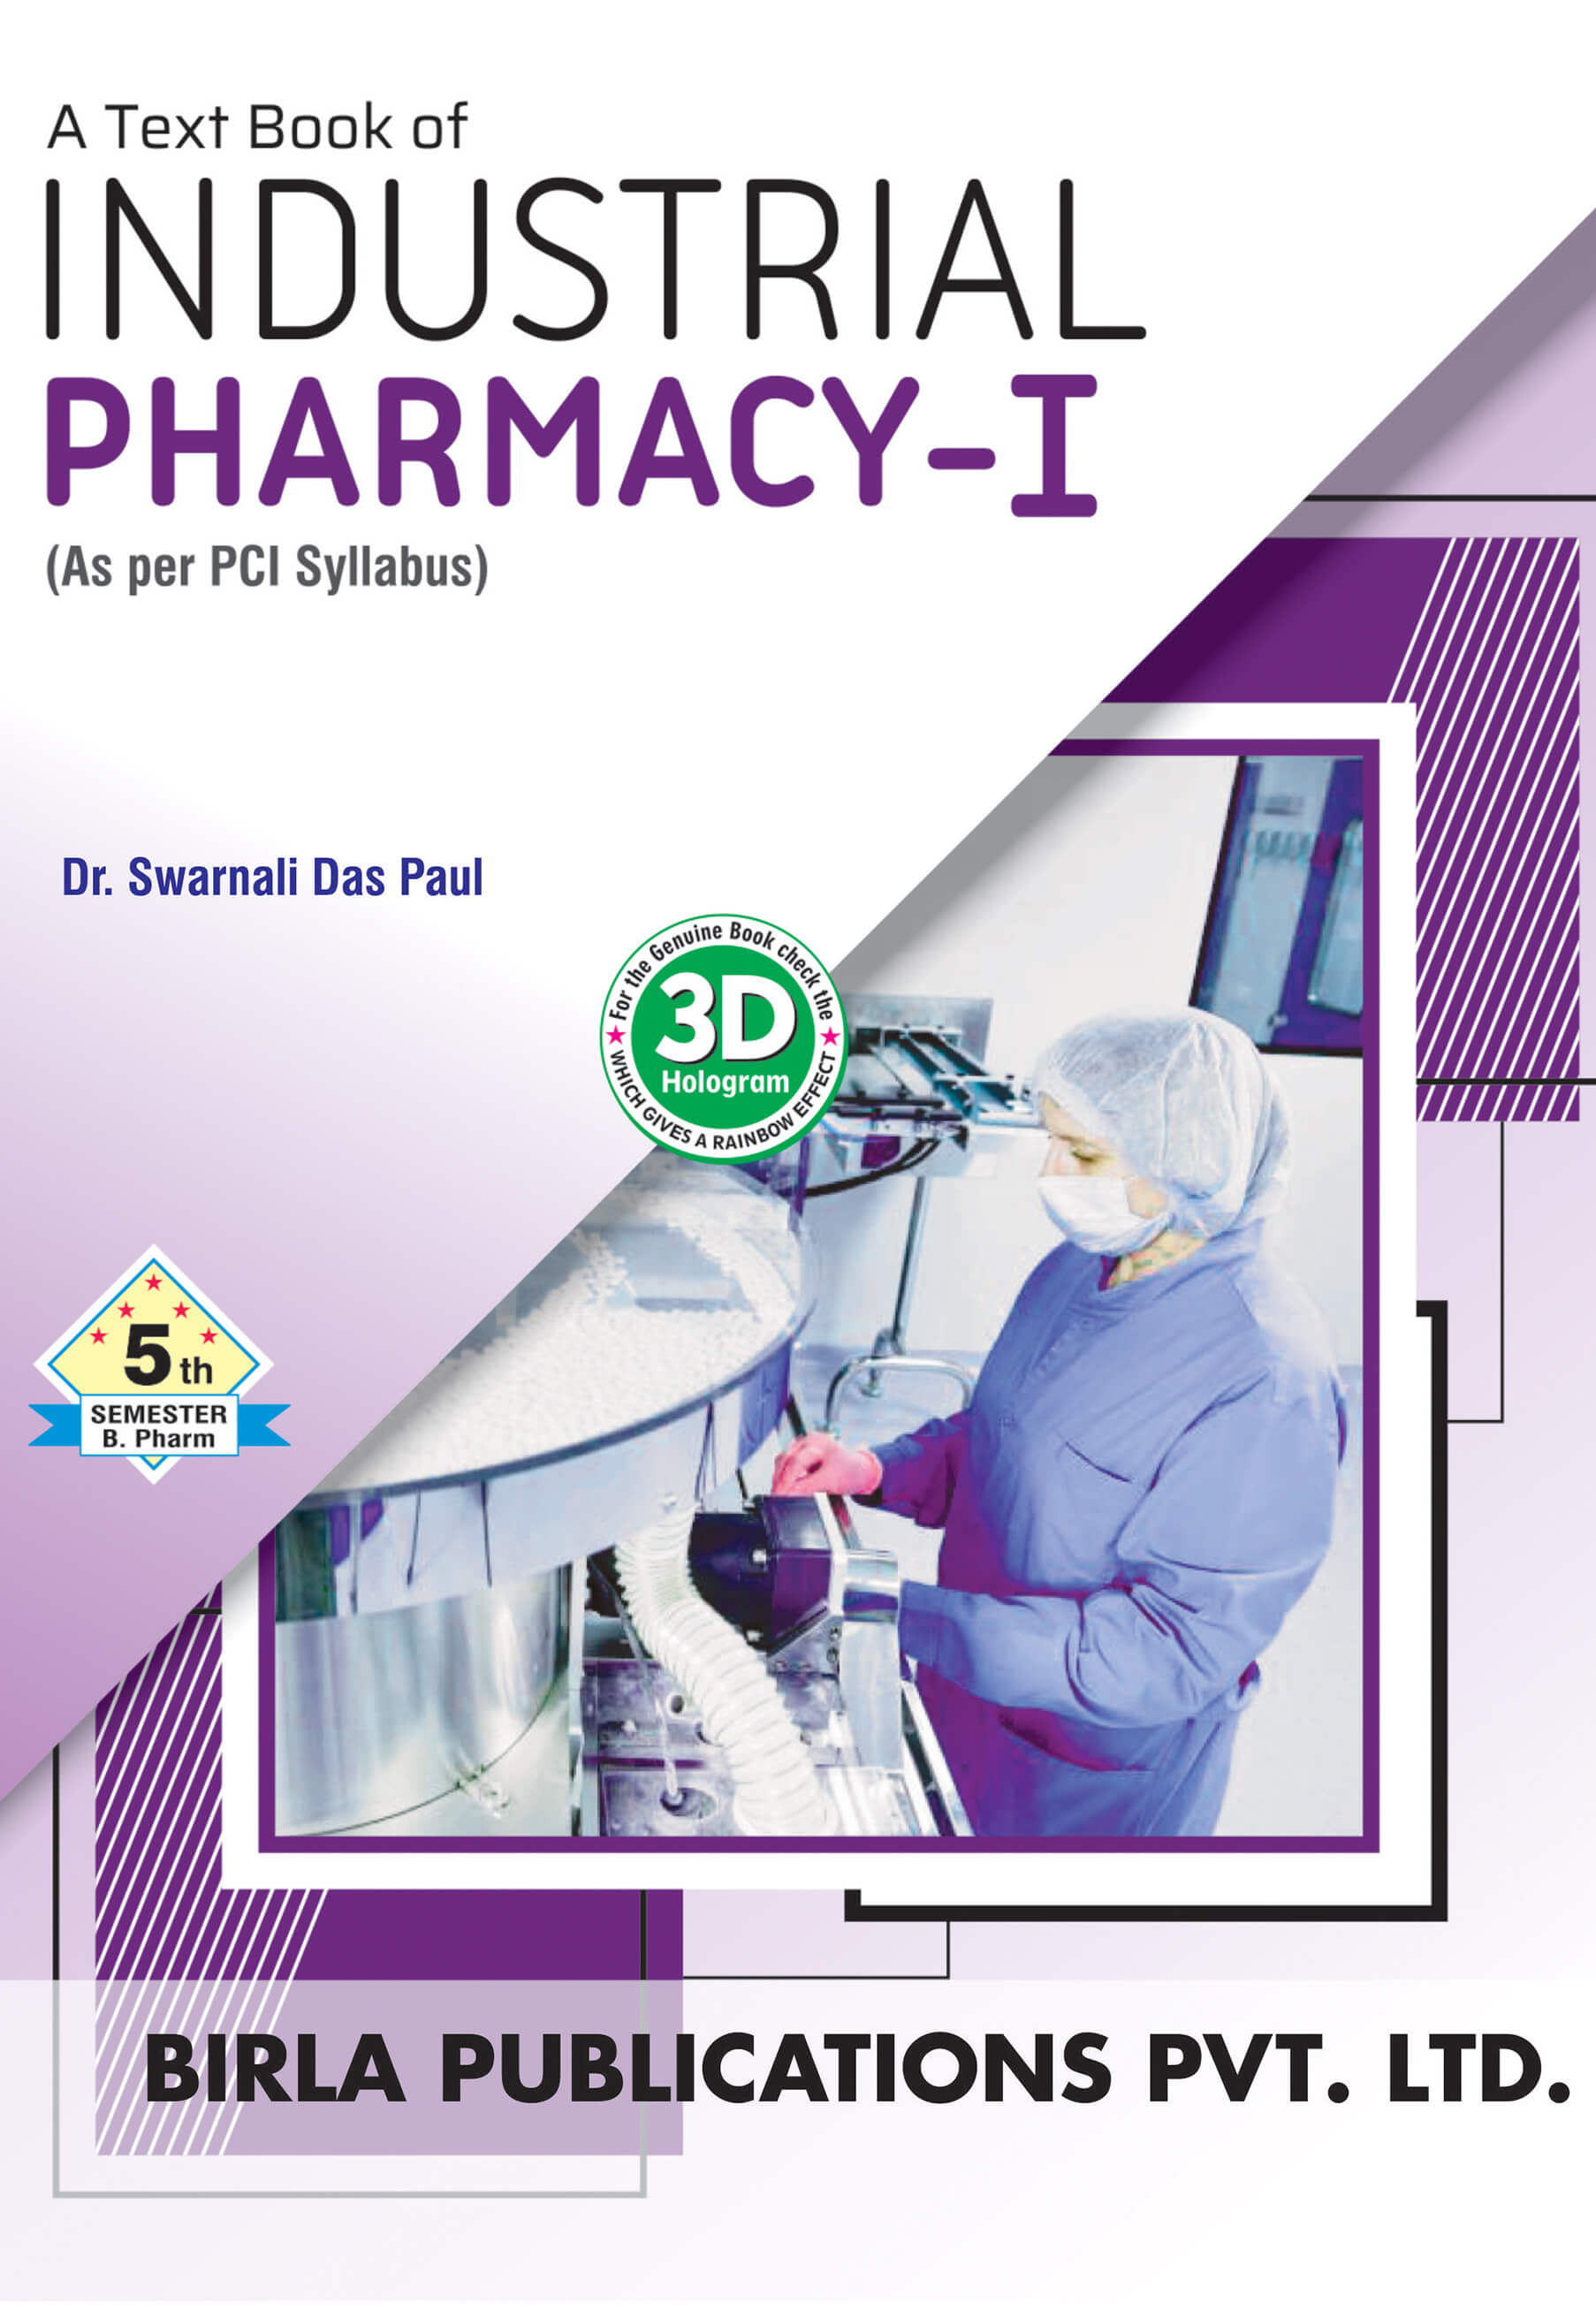 A TEXT BOOK OF INDUSTRIAL PHARMACY-I